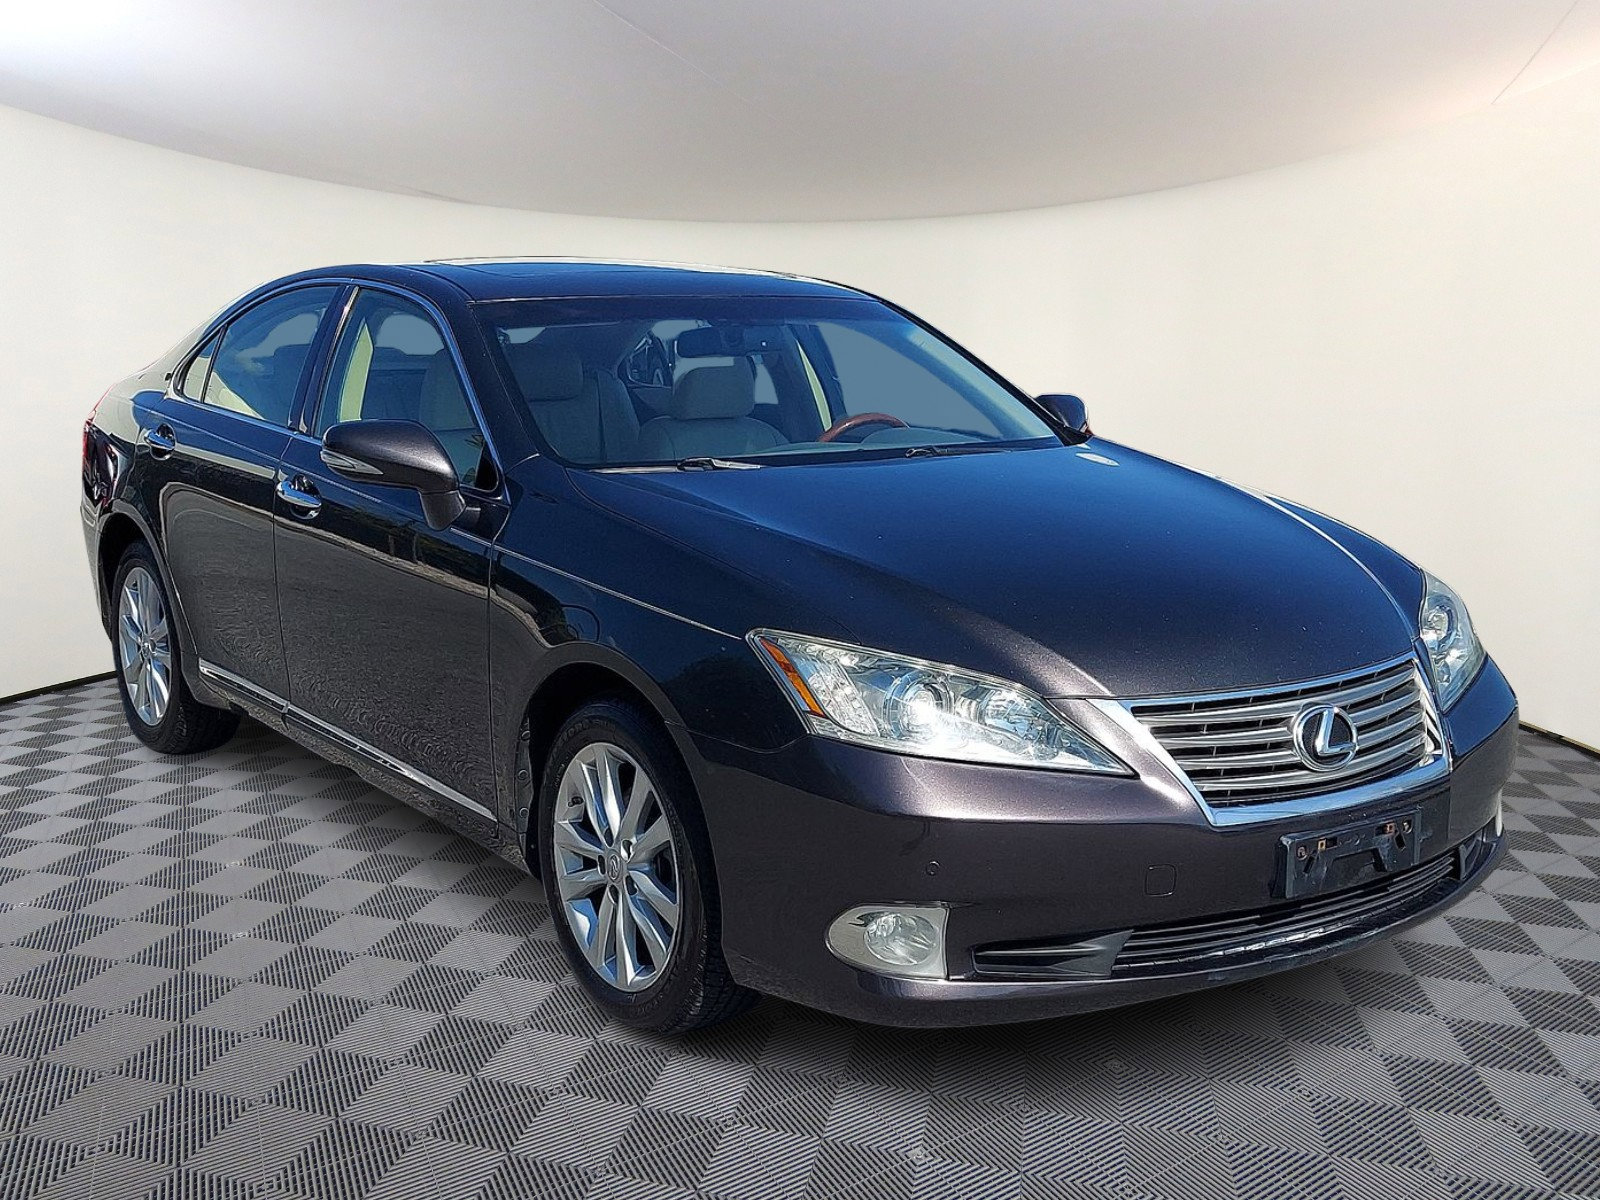 Used 2012 Lexus ES 350 for Sale Near Me in Baltimore, MD - Autotrader